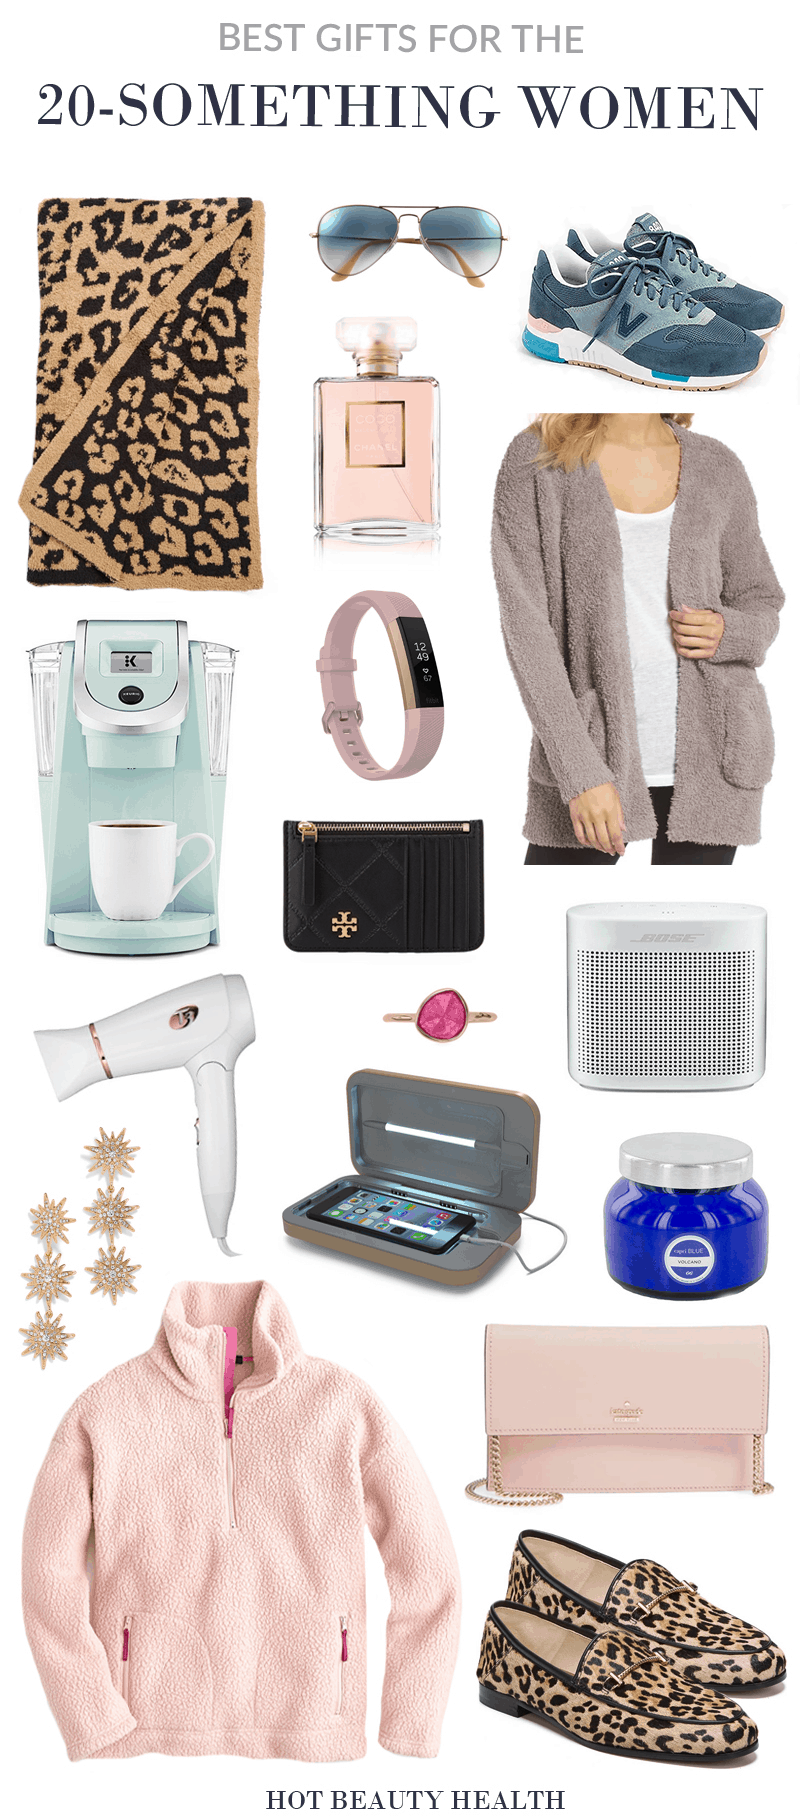 Best Christmas Gifts For Her: 20 Gift Ideas Any Girl Would Love